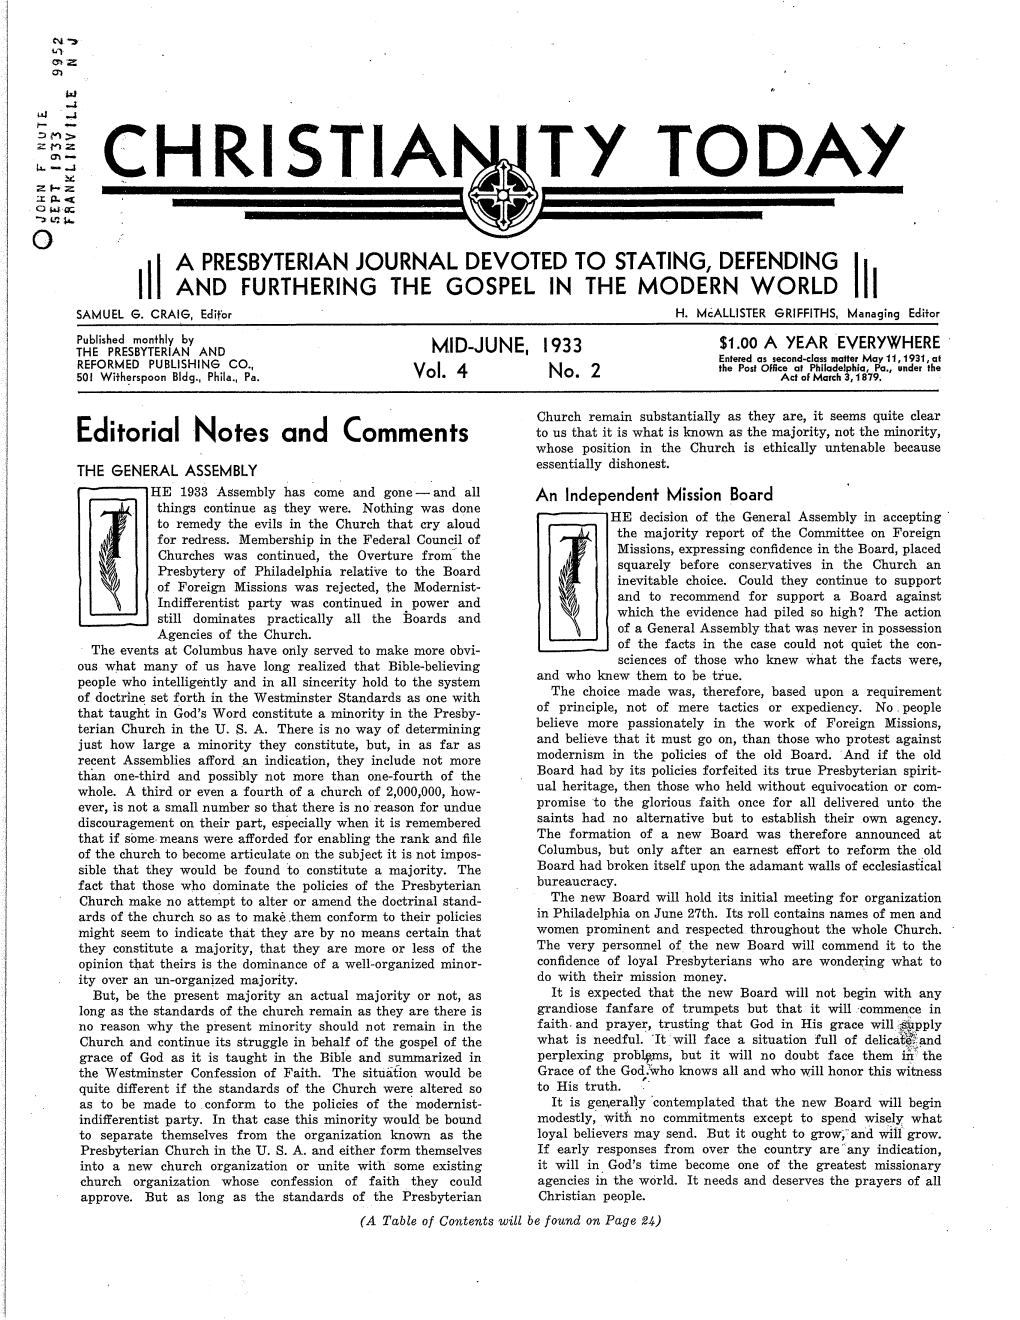 Christianity Today, Vol. 4, No. 2